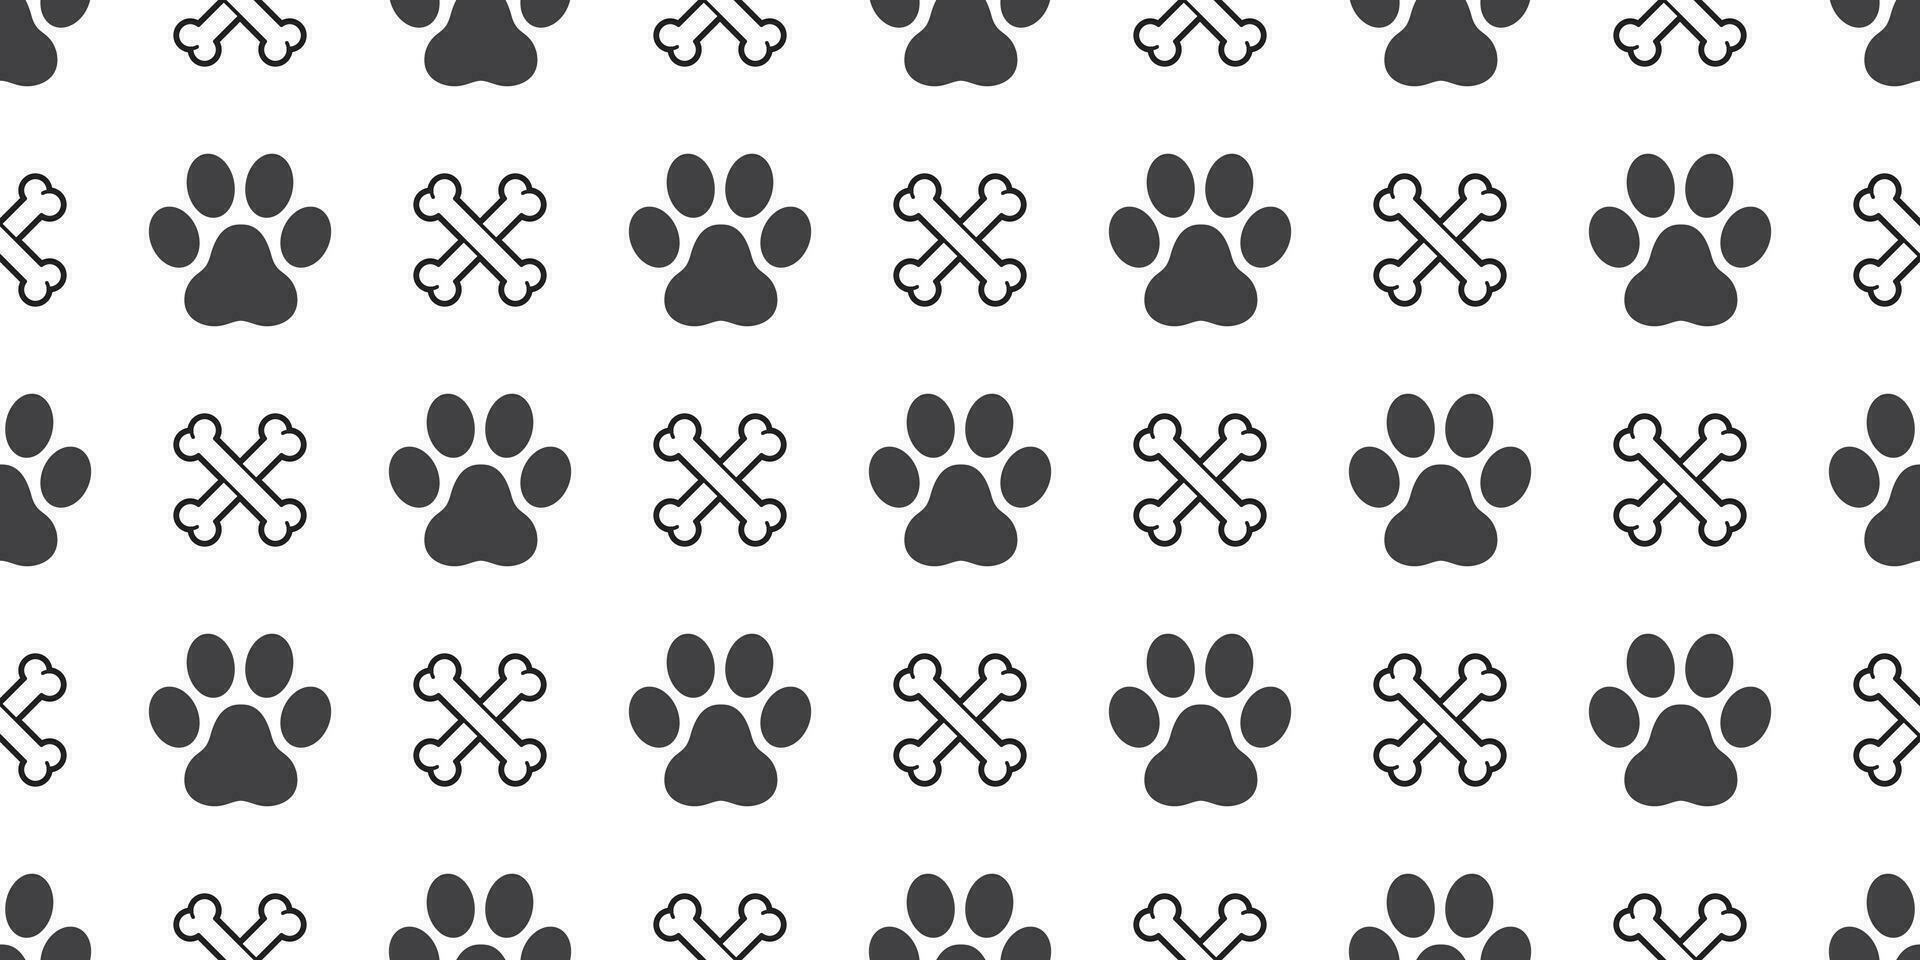 Dog Paw Seamless pattern vector bone Cat Paw puppy kitten cartoon isolated repeat wallpaper tile background